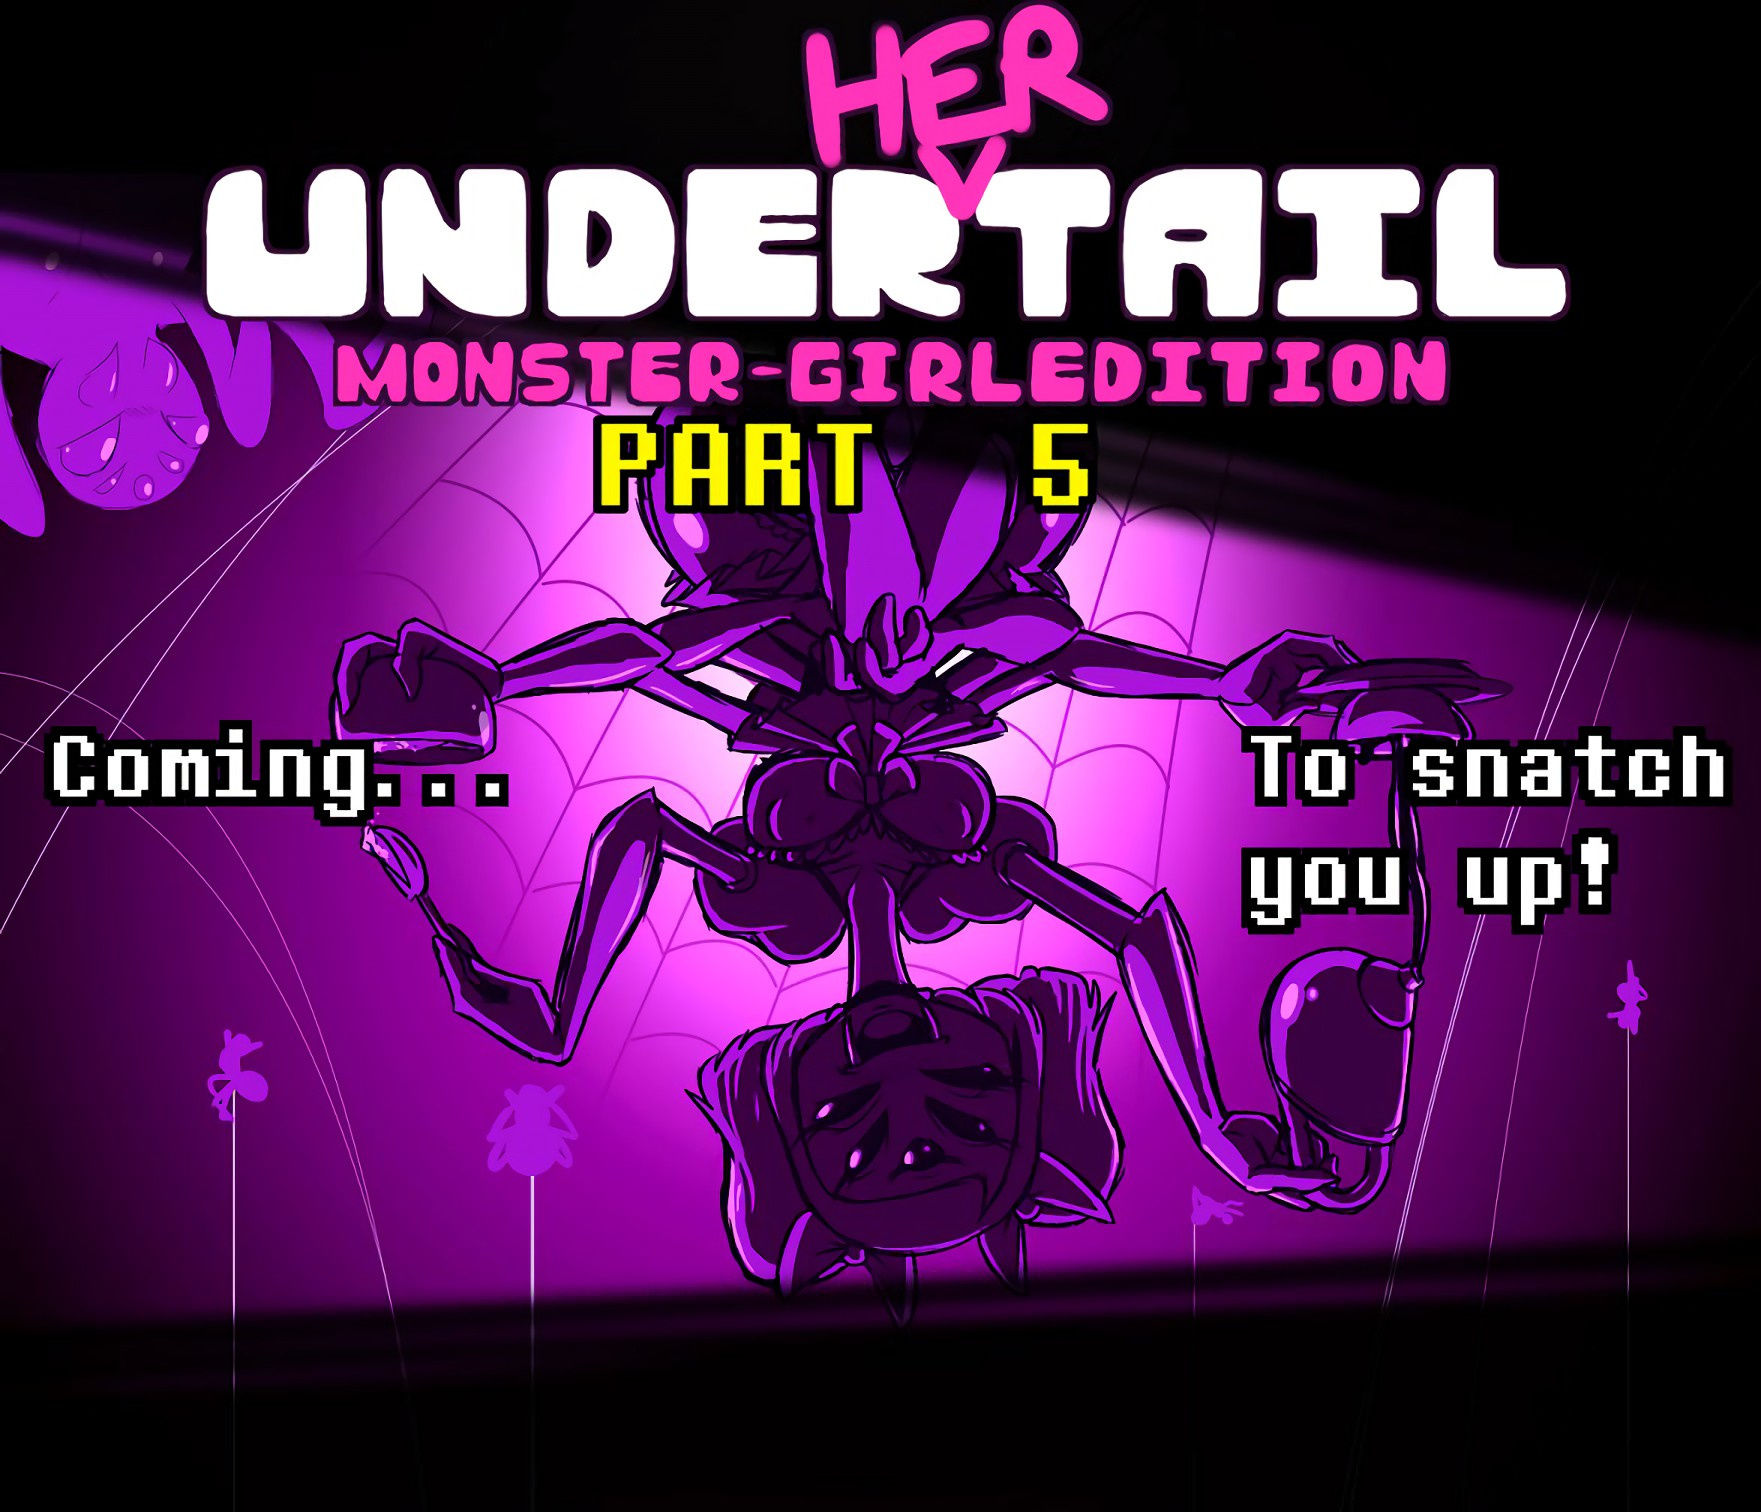 Underhertail monster girledition 5 porn comic picture 1